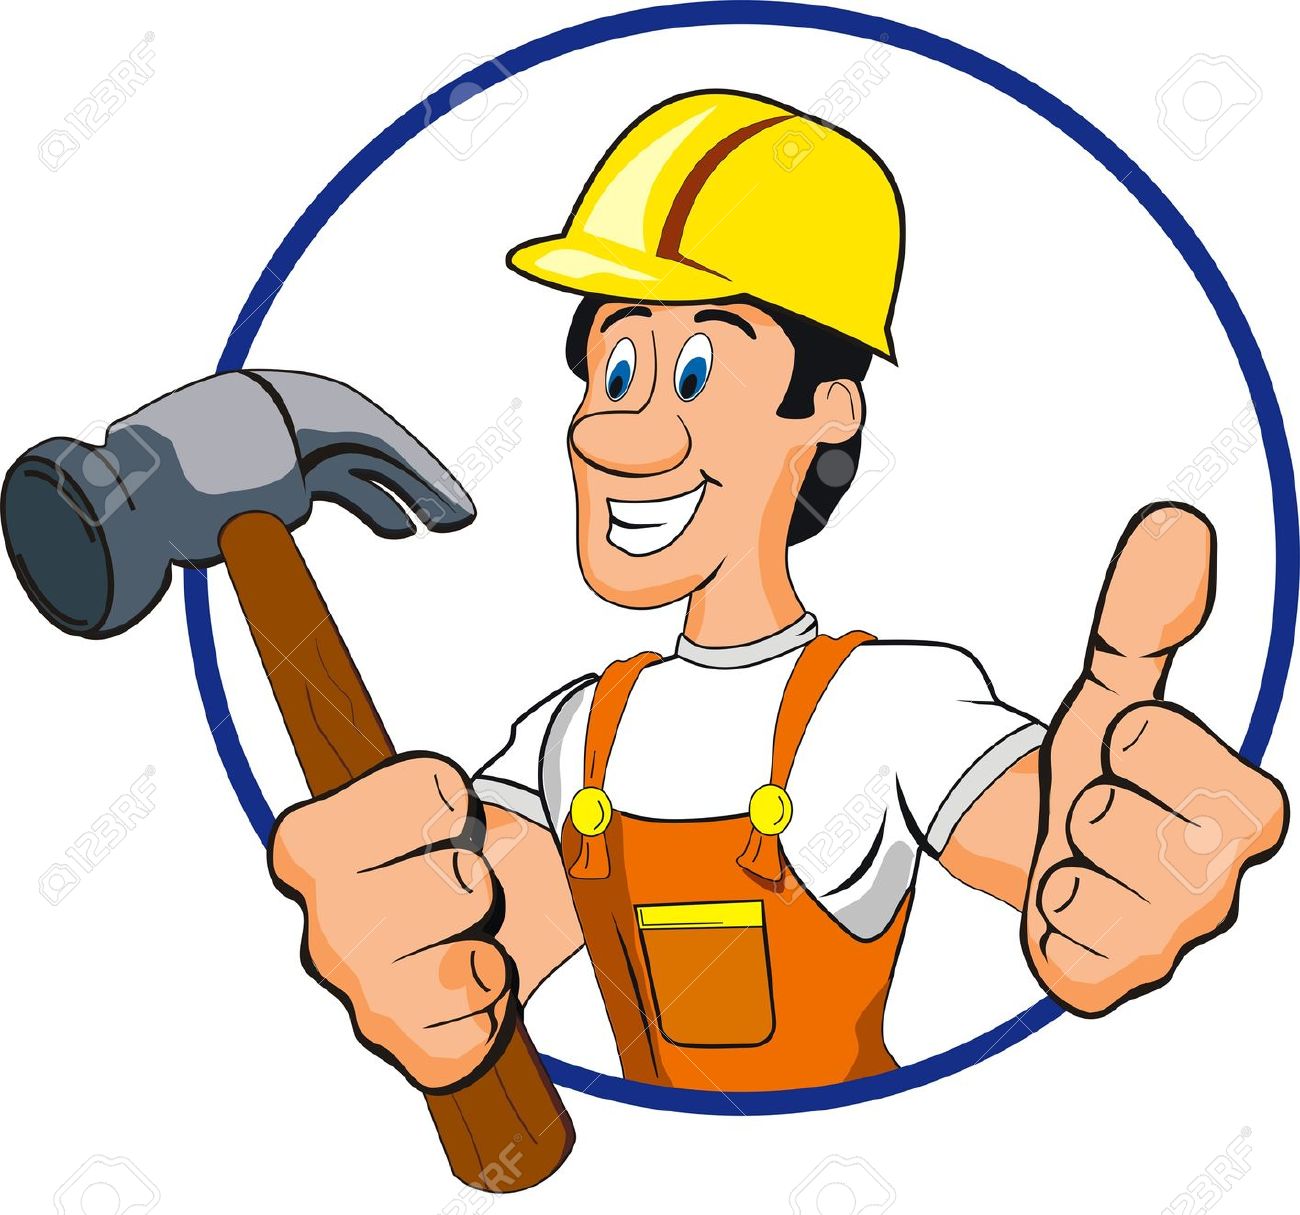 Handyman Images Free Clipart